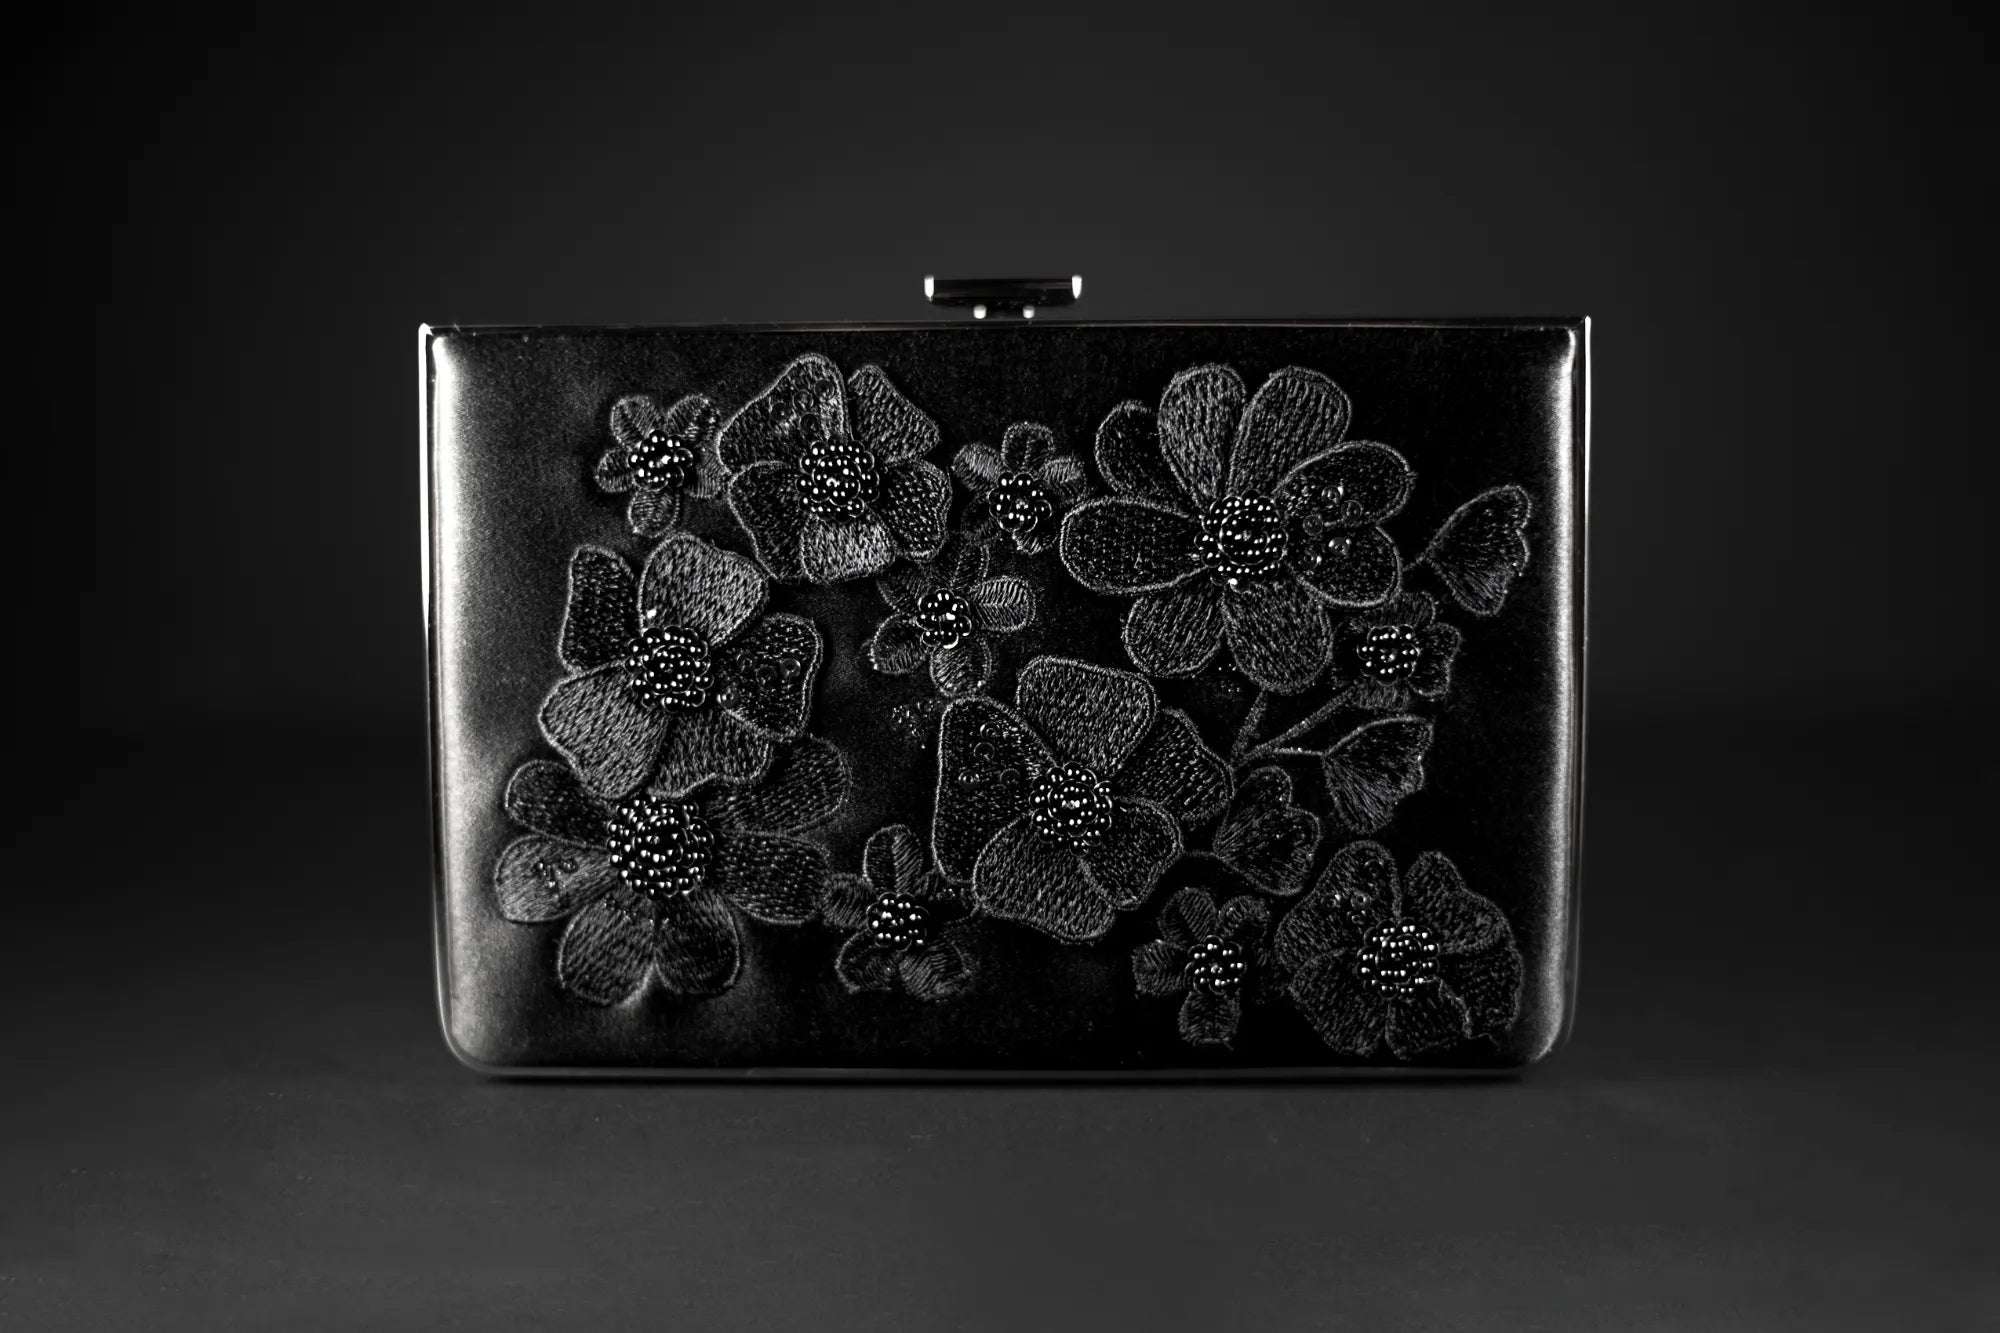 An exclusive Venezia Clutch x MICAELA - Black Satin Floral Embroidery from The Bella Rosa Collection featuring 3D floral embroidery.